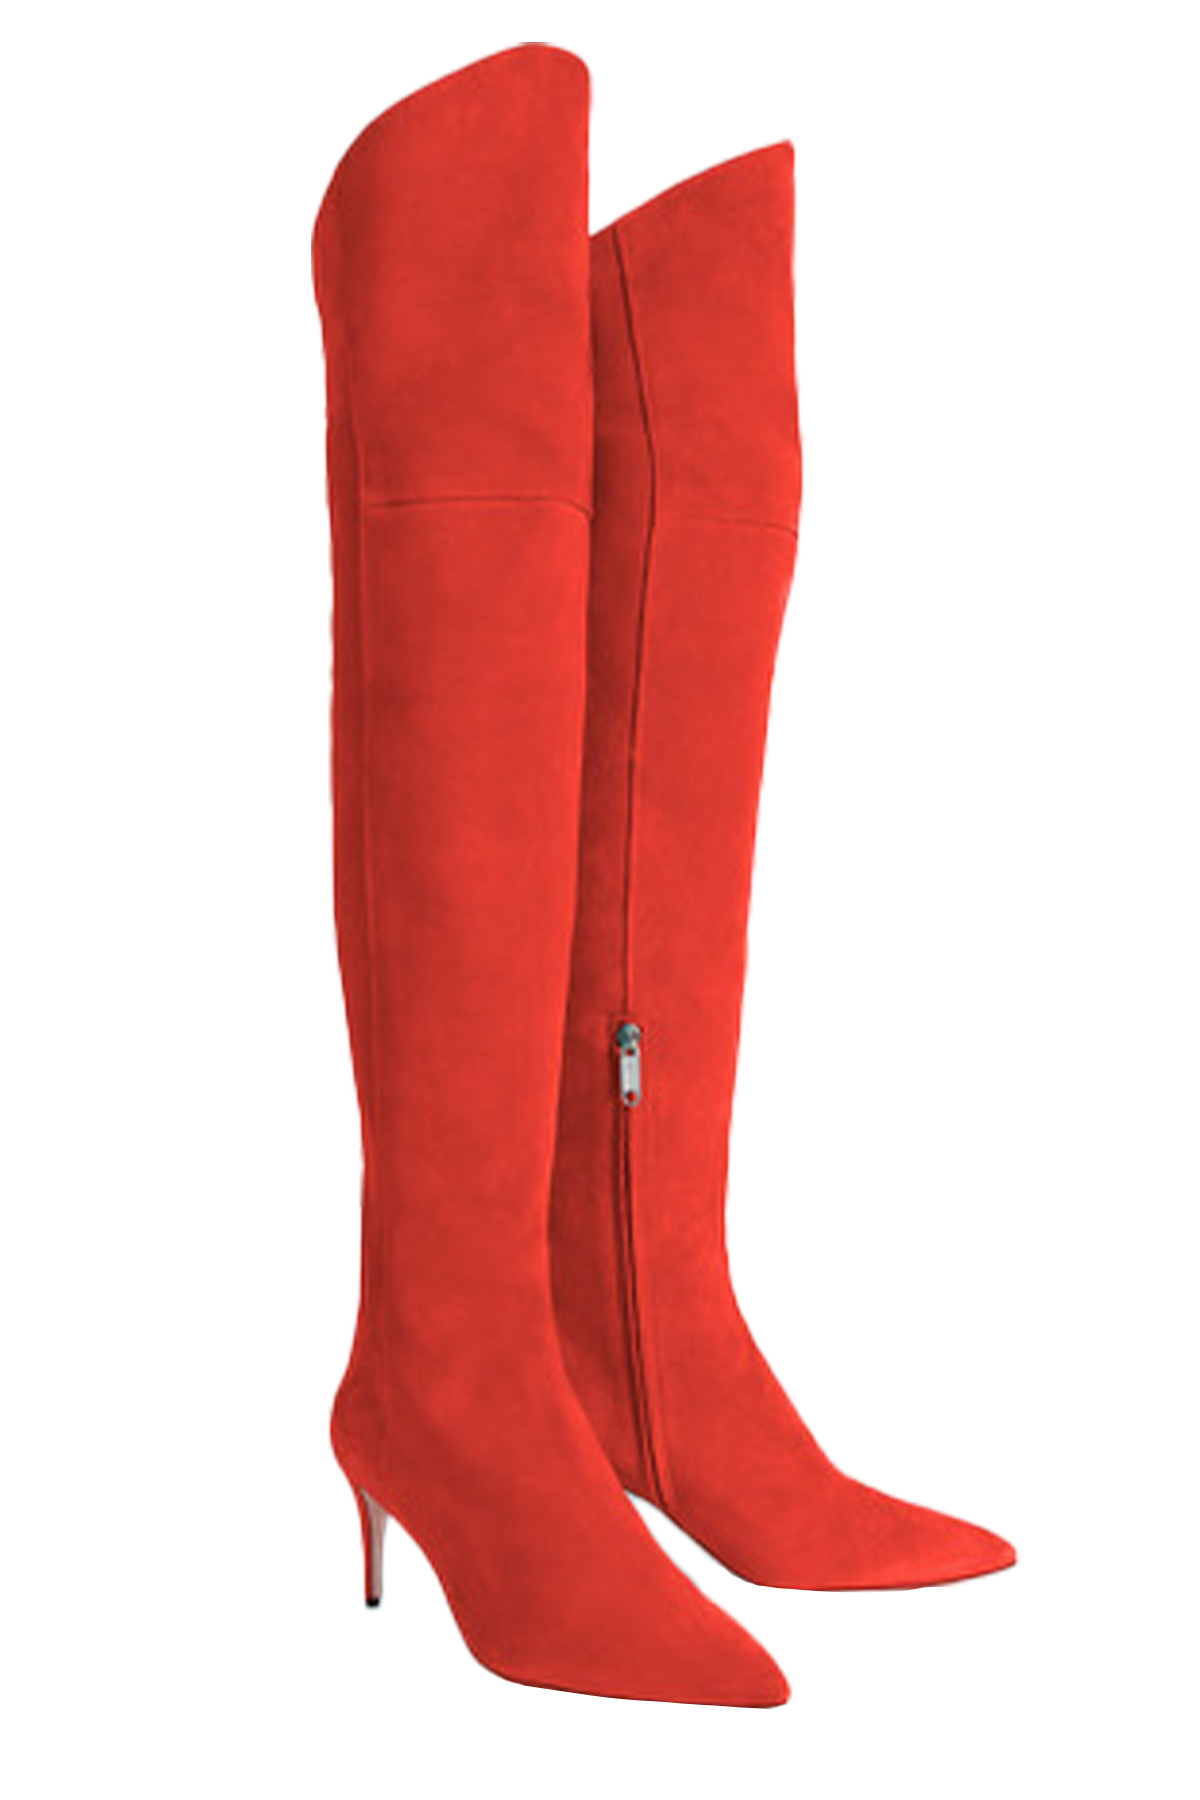 Vacilion Red Boots, Skinny Leg Tribe